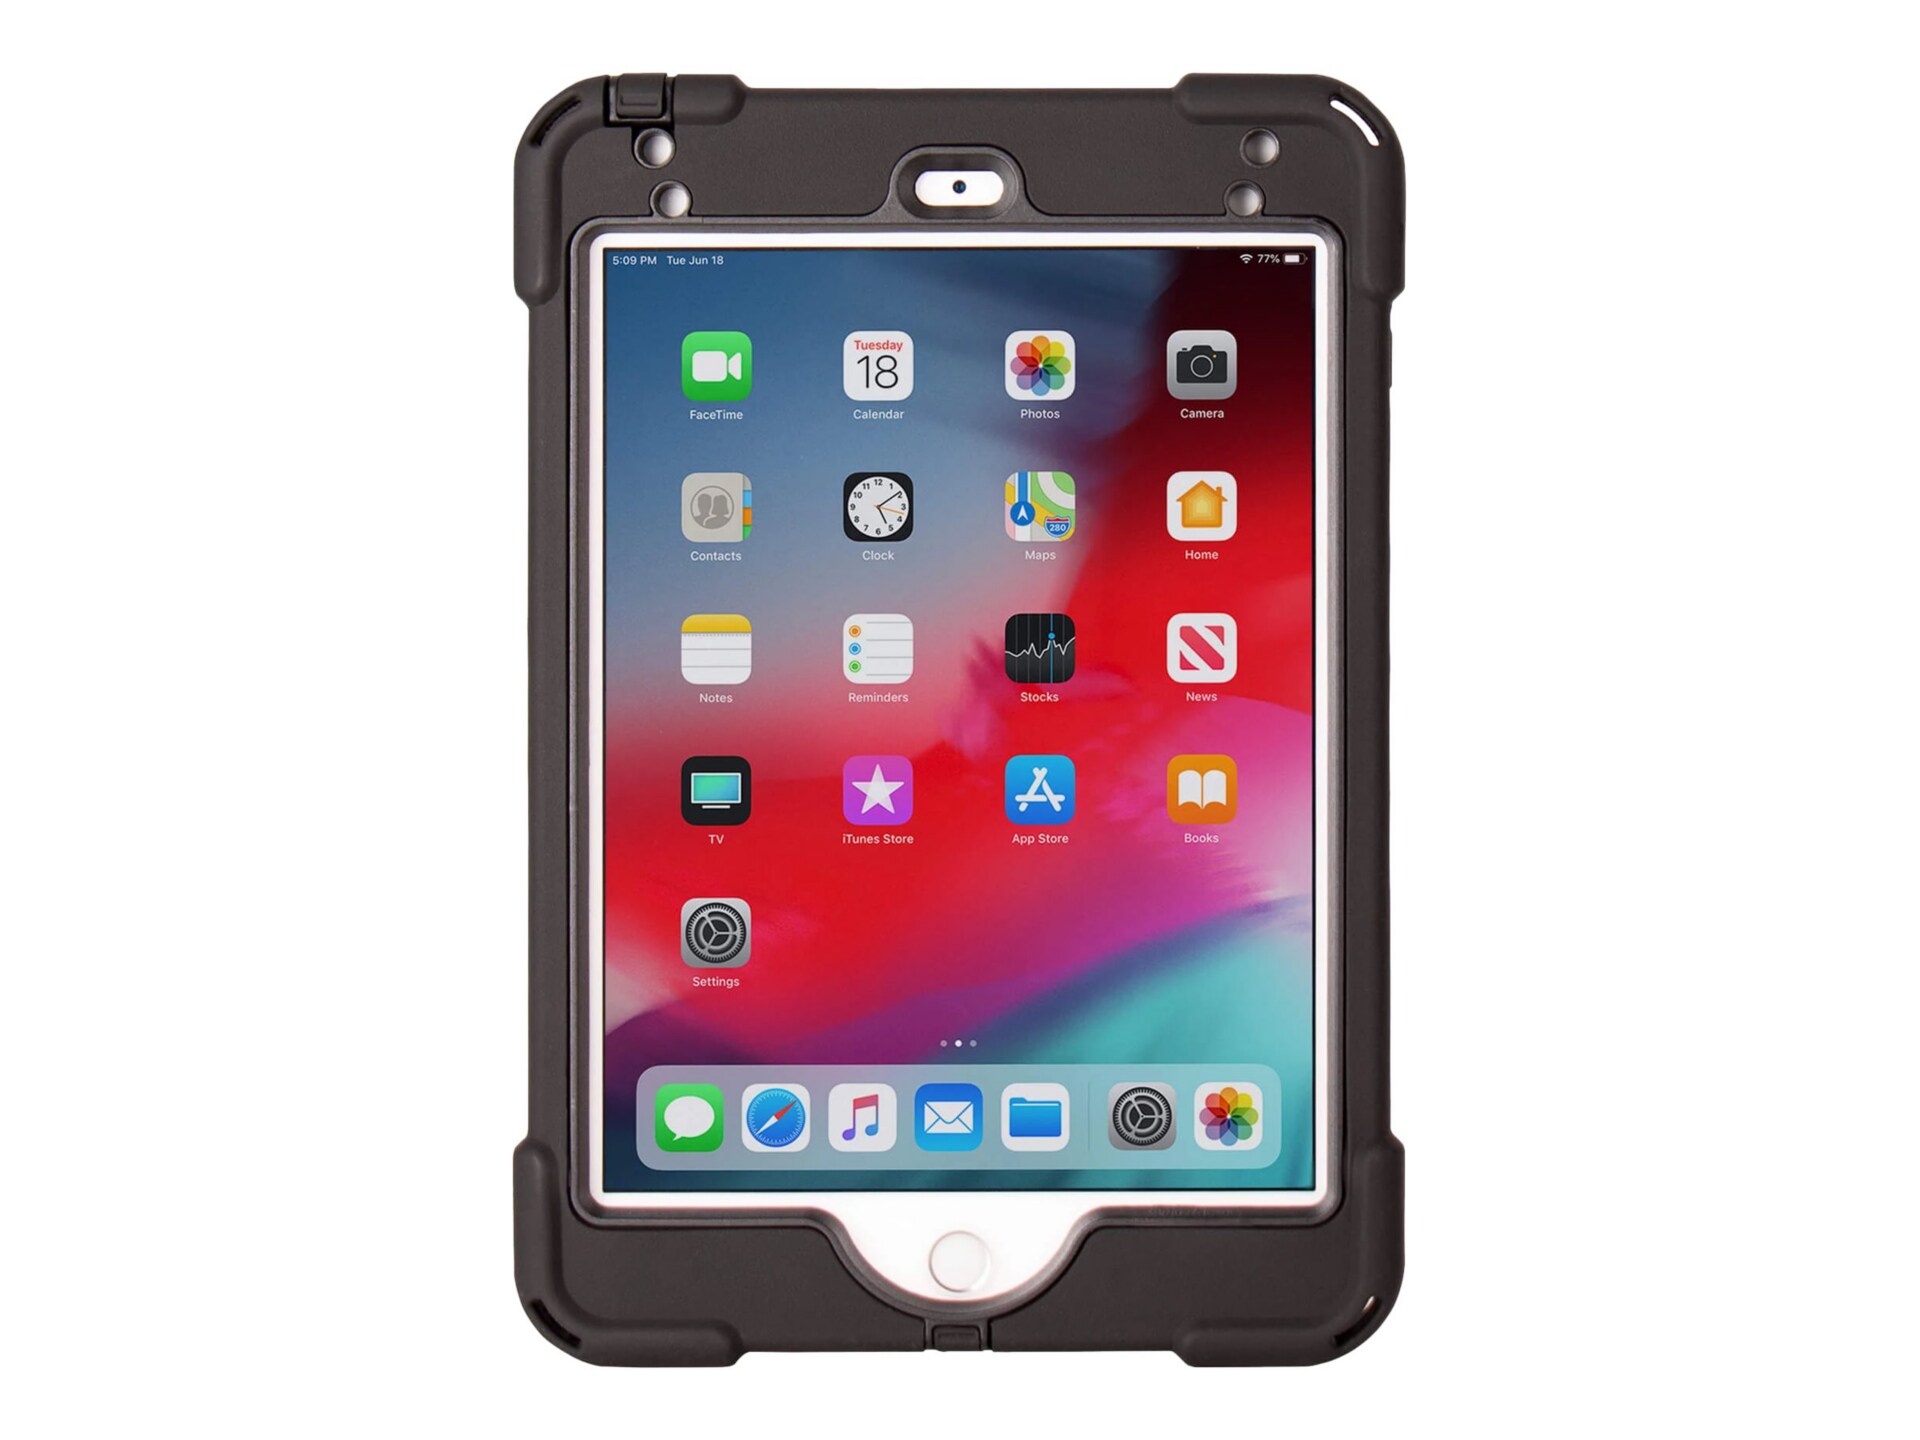 Joy aXtion Bold P-Series CWE402 - protective case for tablet